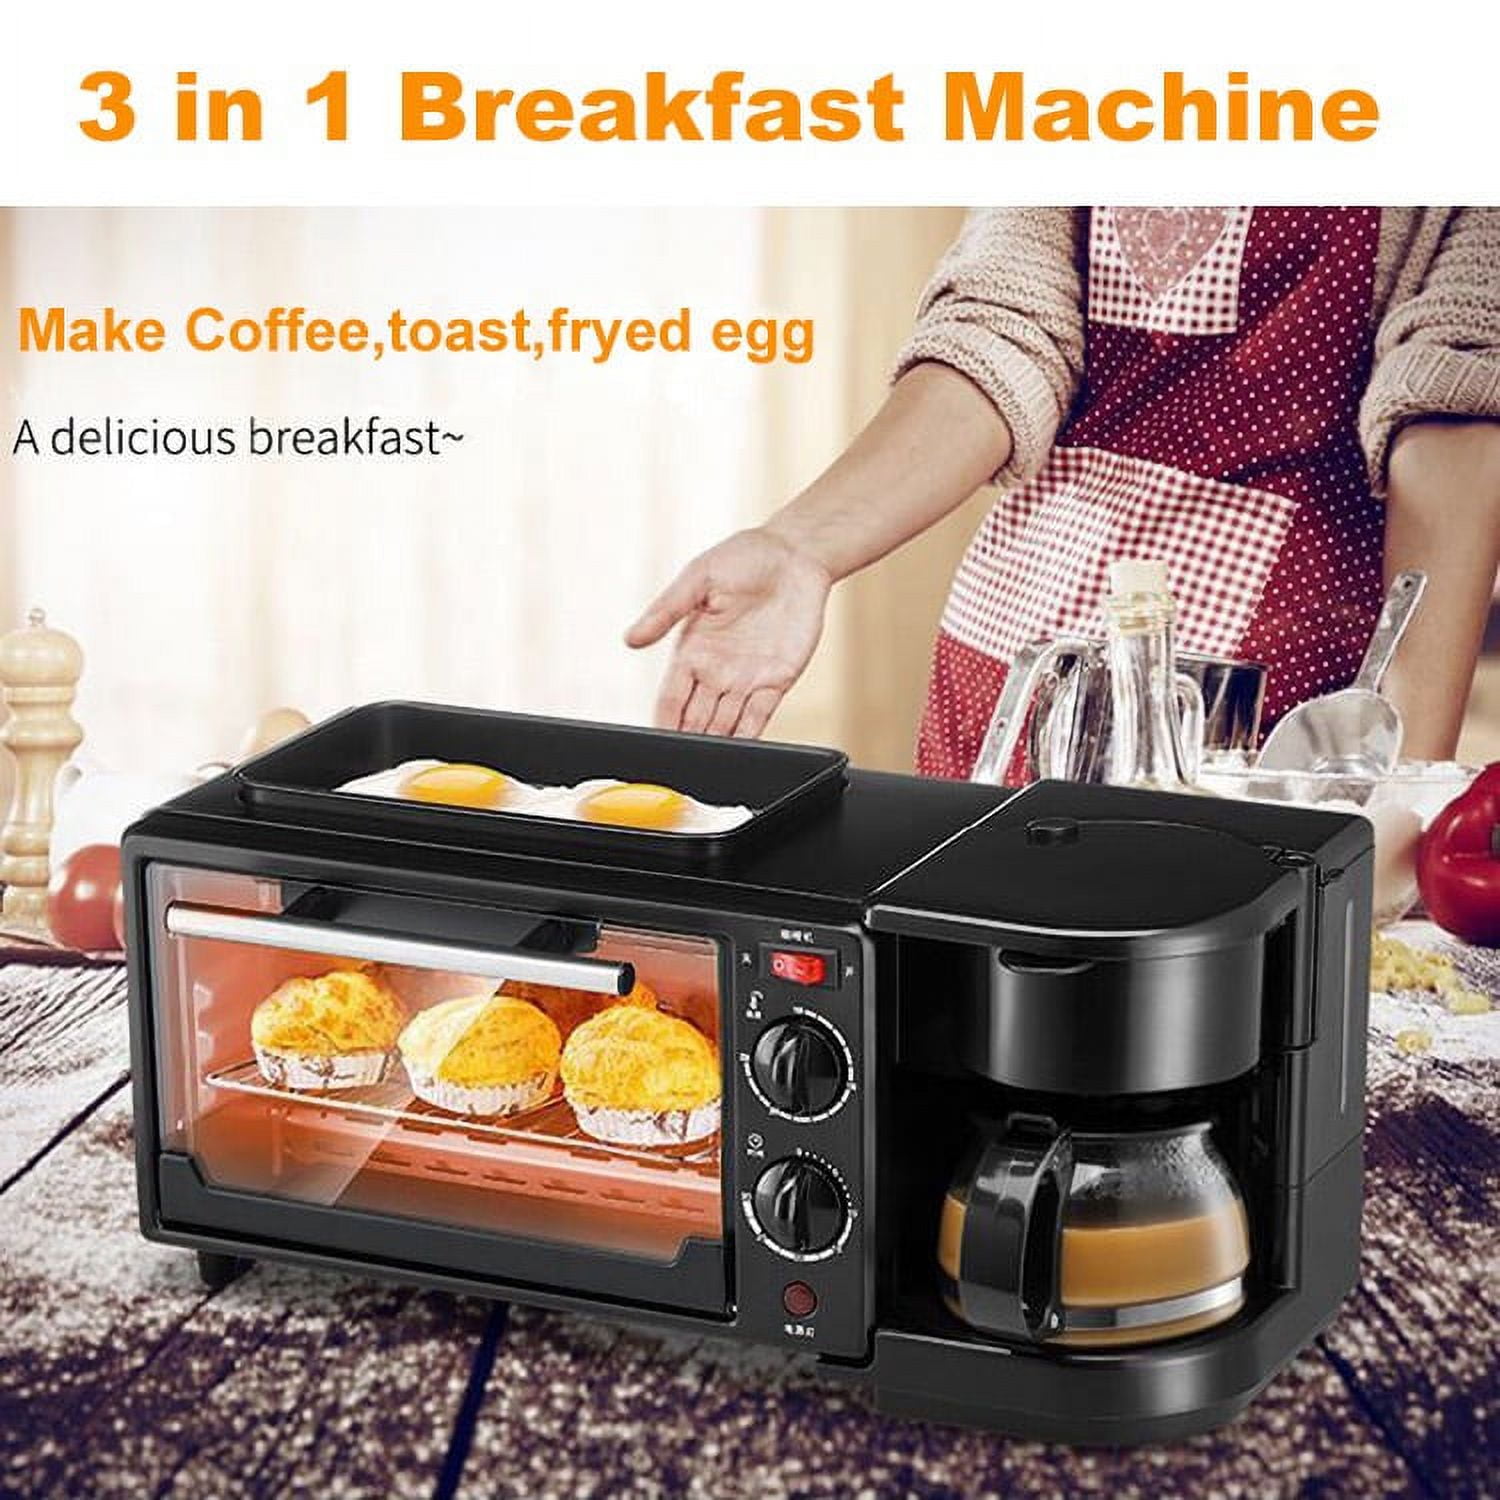 Buy 3-in-1 Complete Breakfast Machine Combination - Oven, Frying Pan and  Coffee Maker (9 Liters) at ShopLC.